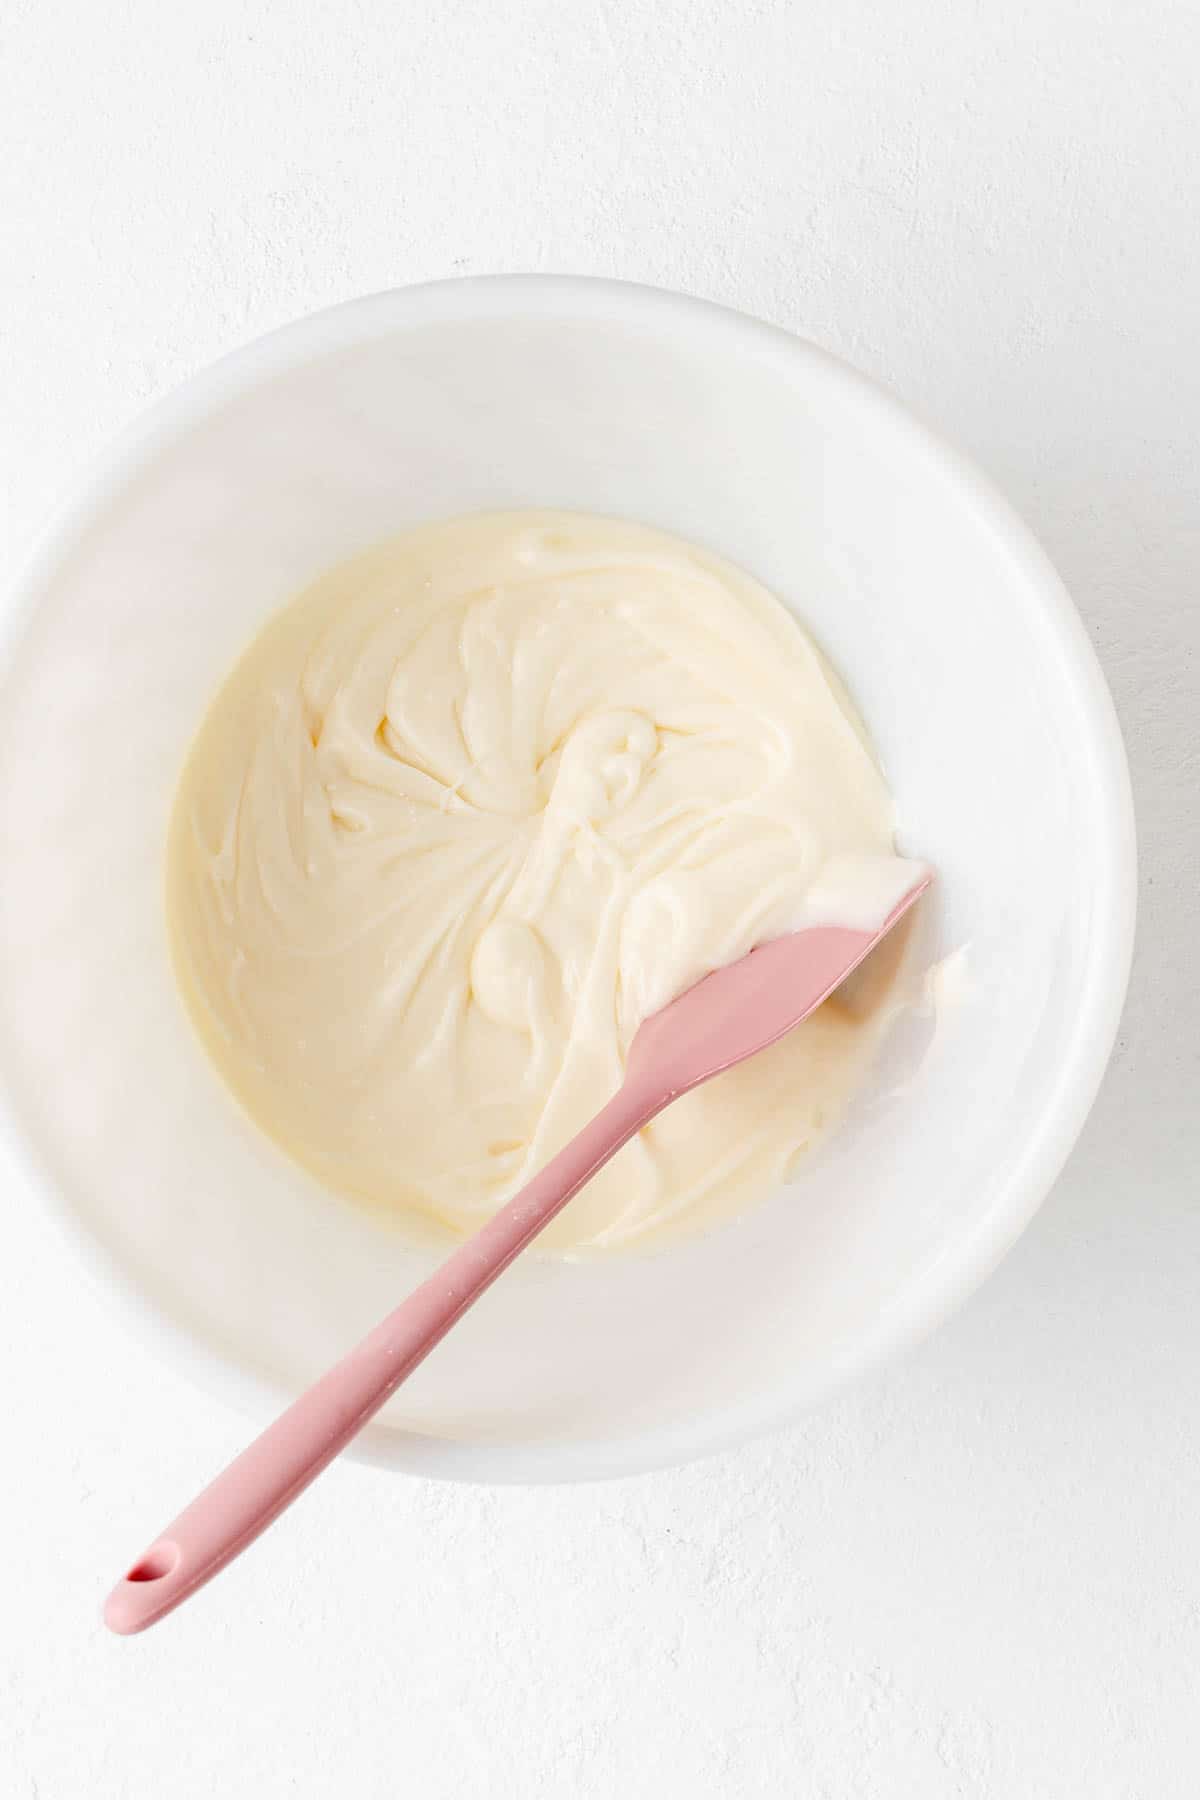 Cream cheese glaze in a white bowl with pink spatula on white background.